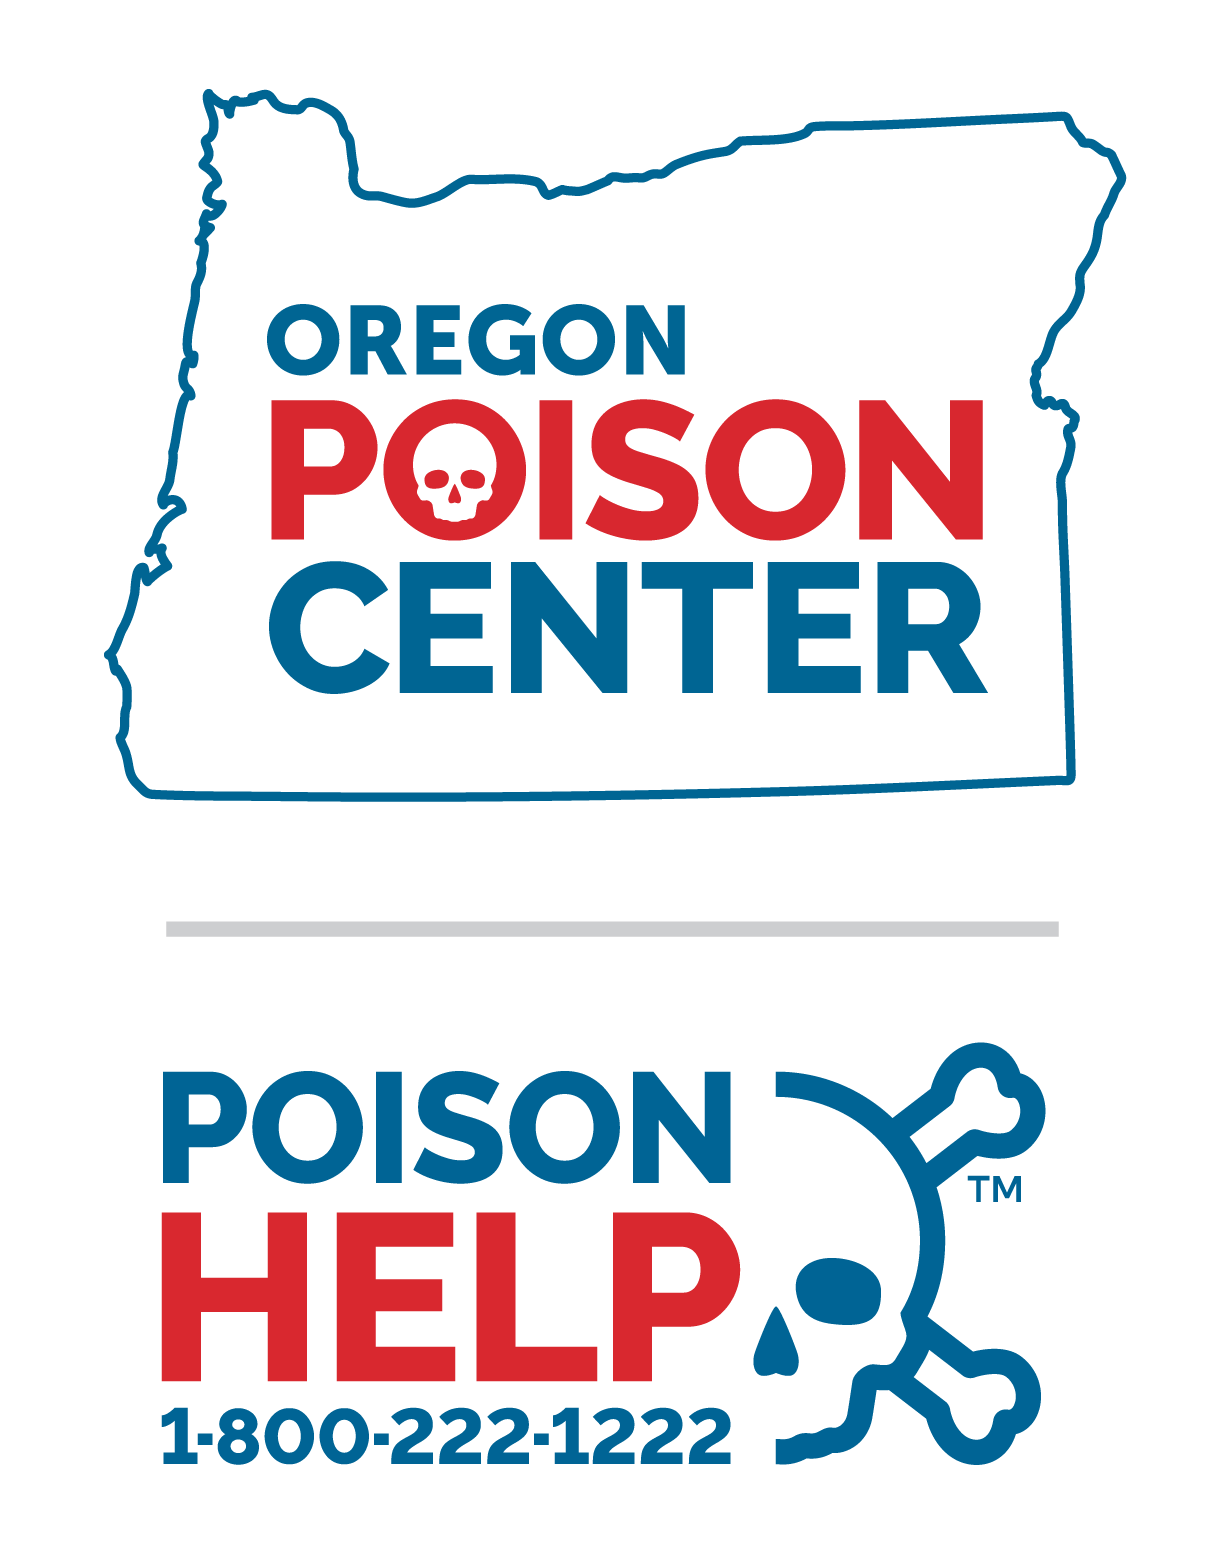 The Oregon Poison Center logo is framed by the state of Oregon outline and accompanied by the Poison Help hotline: 1-800-222-1222